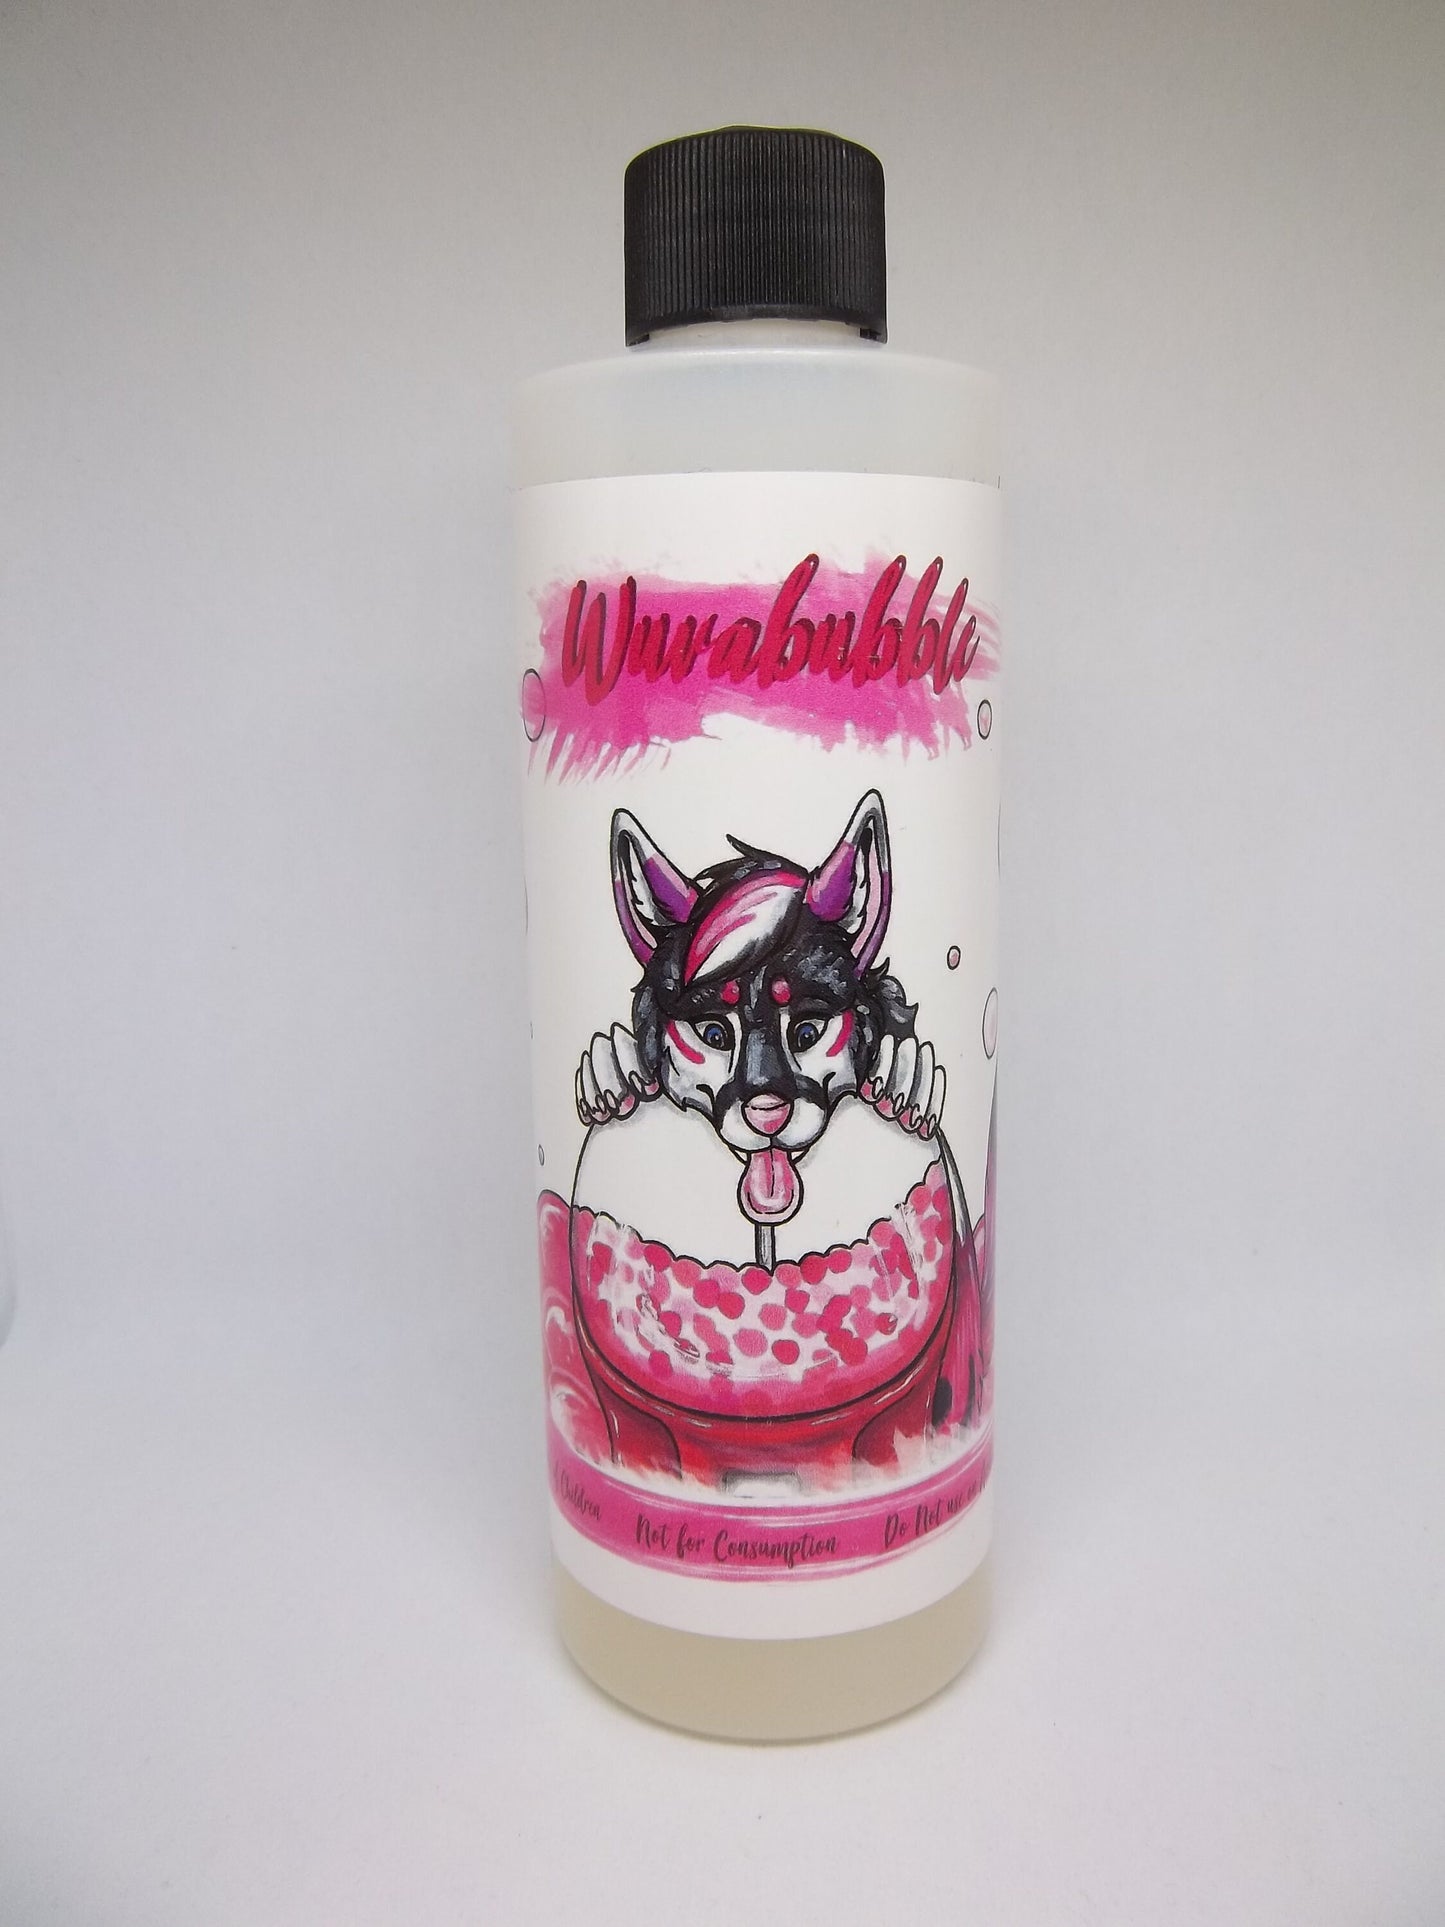 Fursuit Spray Bubblegum Wuvabubble Bottle Fragrance and Cleaner 8oz Essential Cleaning Costume Cleaner US Buyers Only